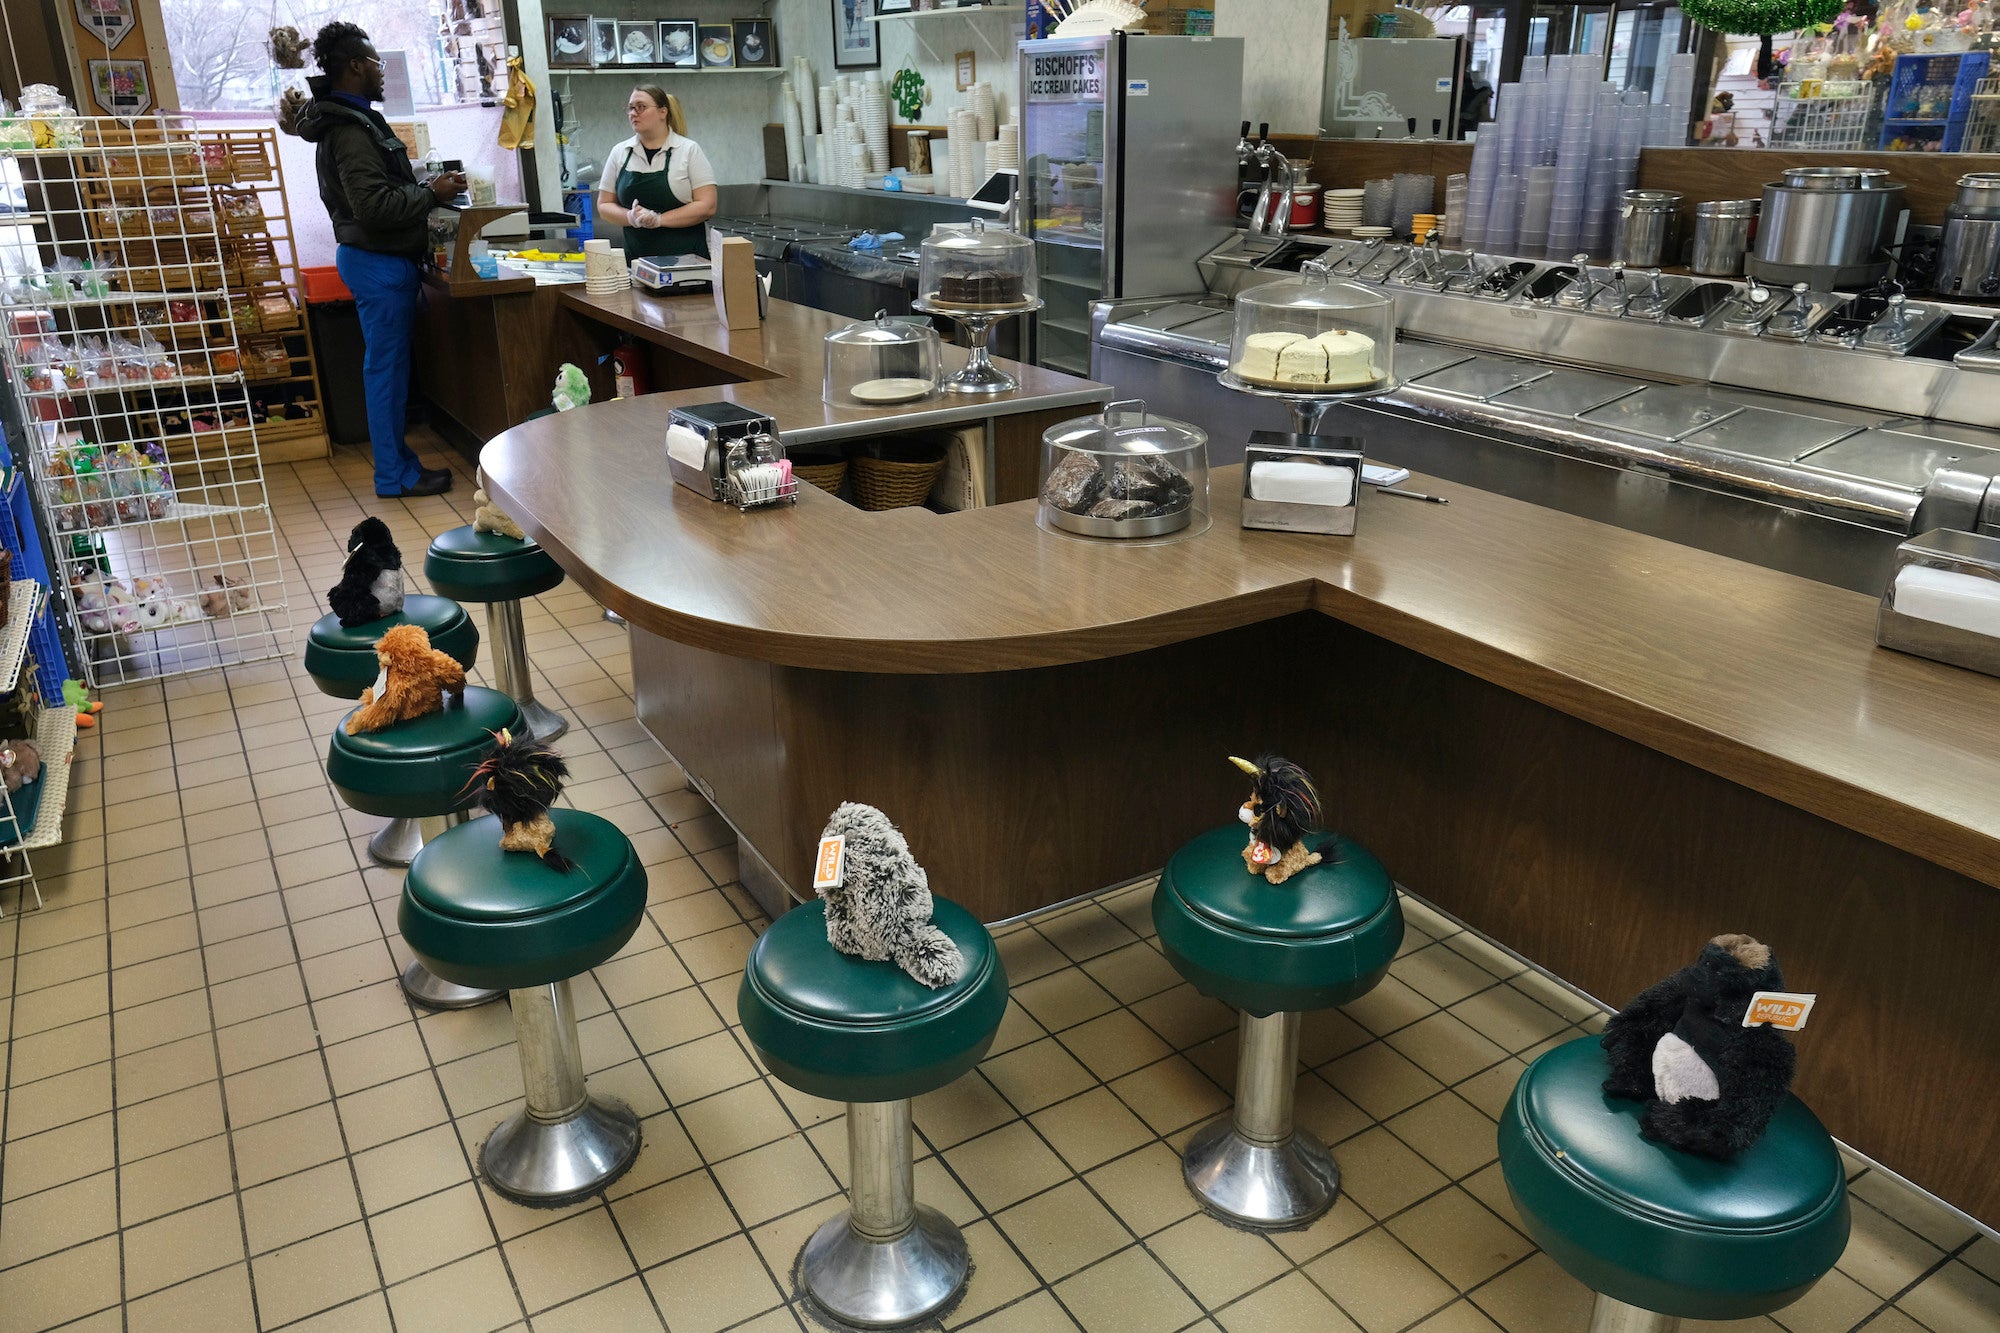 Stuffed animals on the stools in Bischoff's, an ice cream parlor